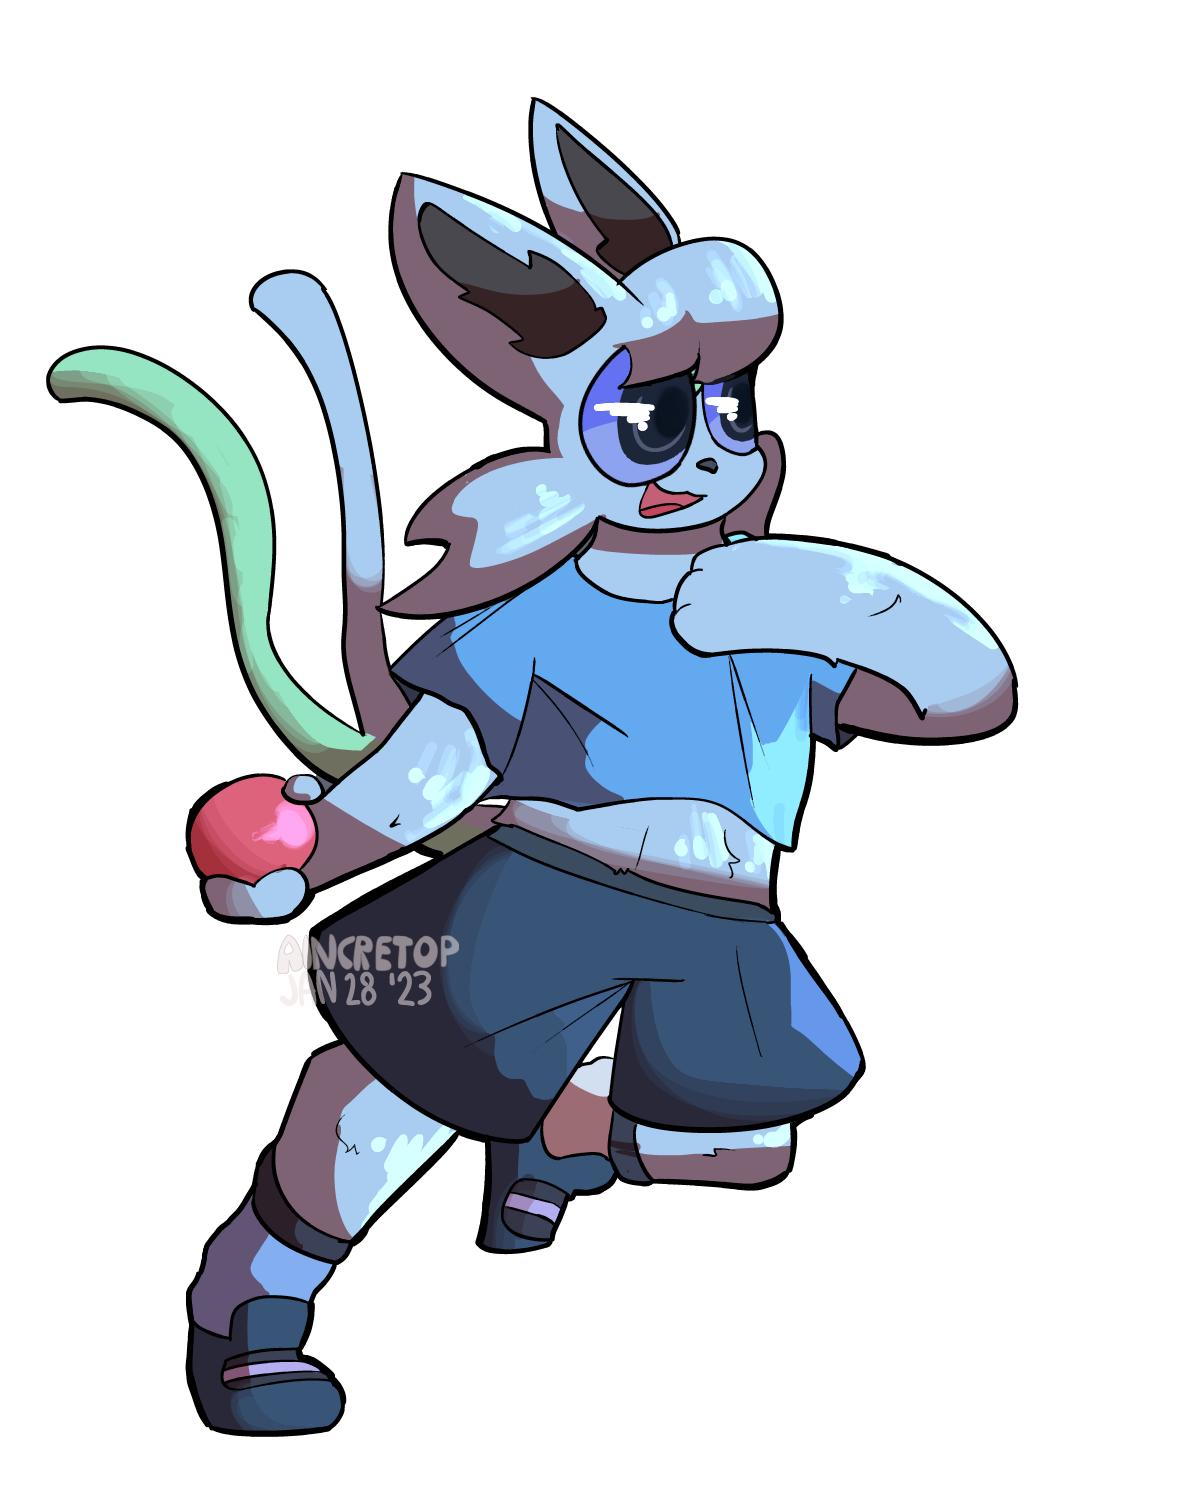 A pale blue furry character throwing a ball happily.